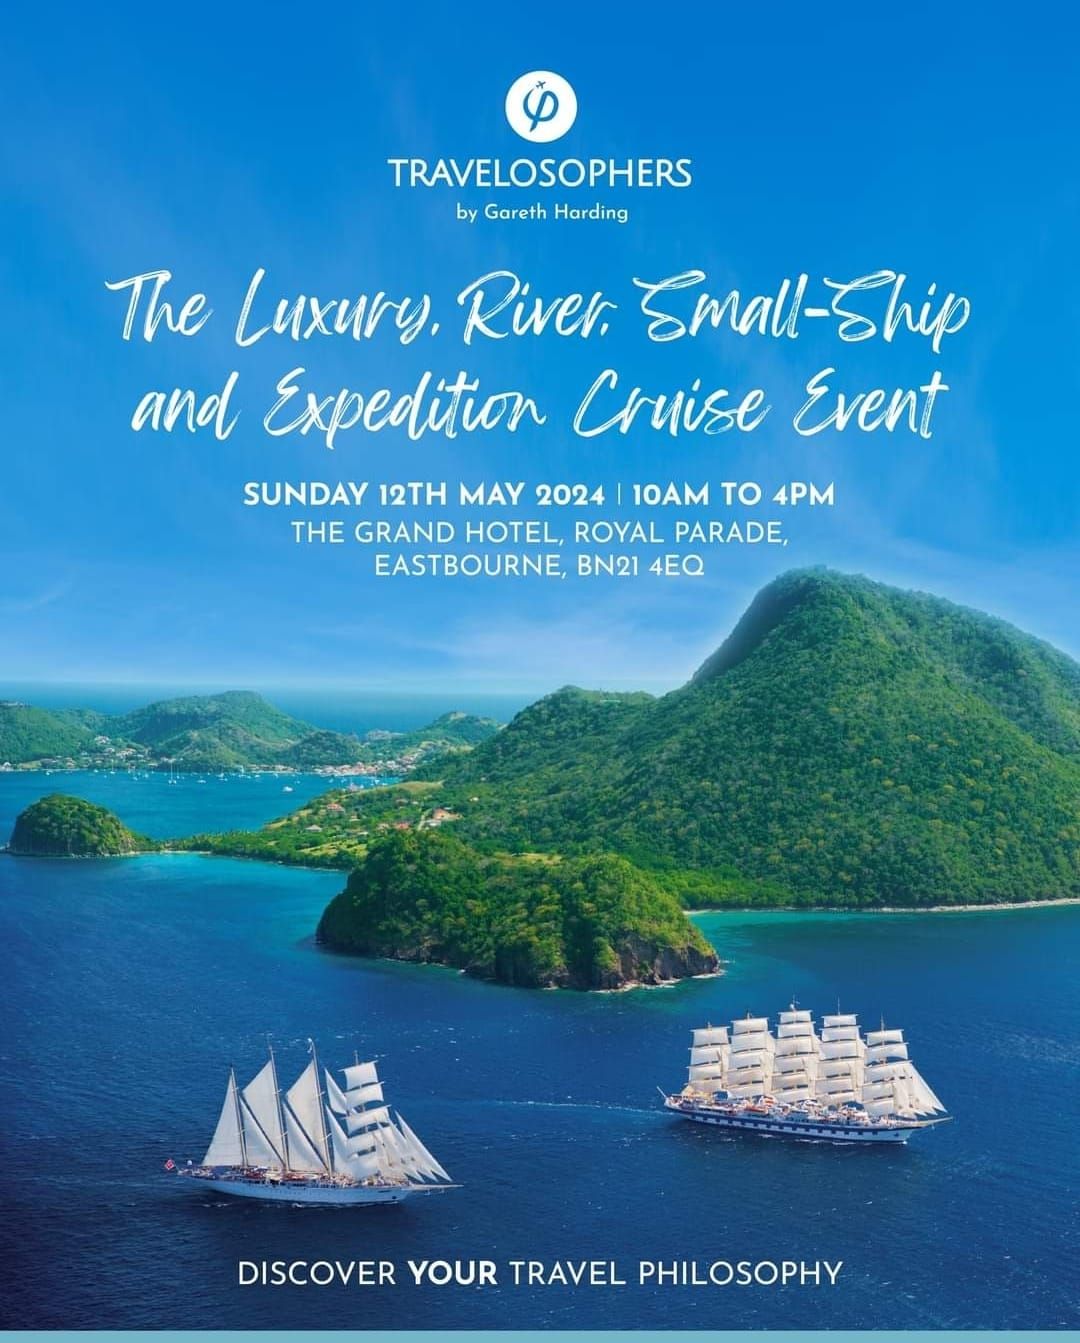 The Luxury, River, Small Ship & Expedition Cruise Event